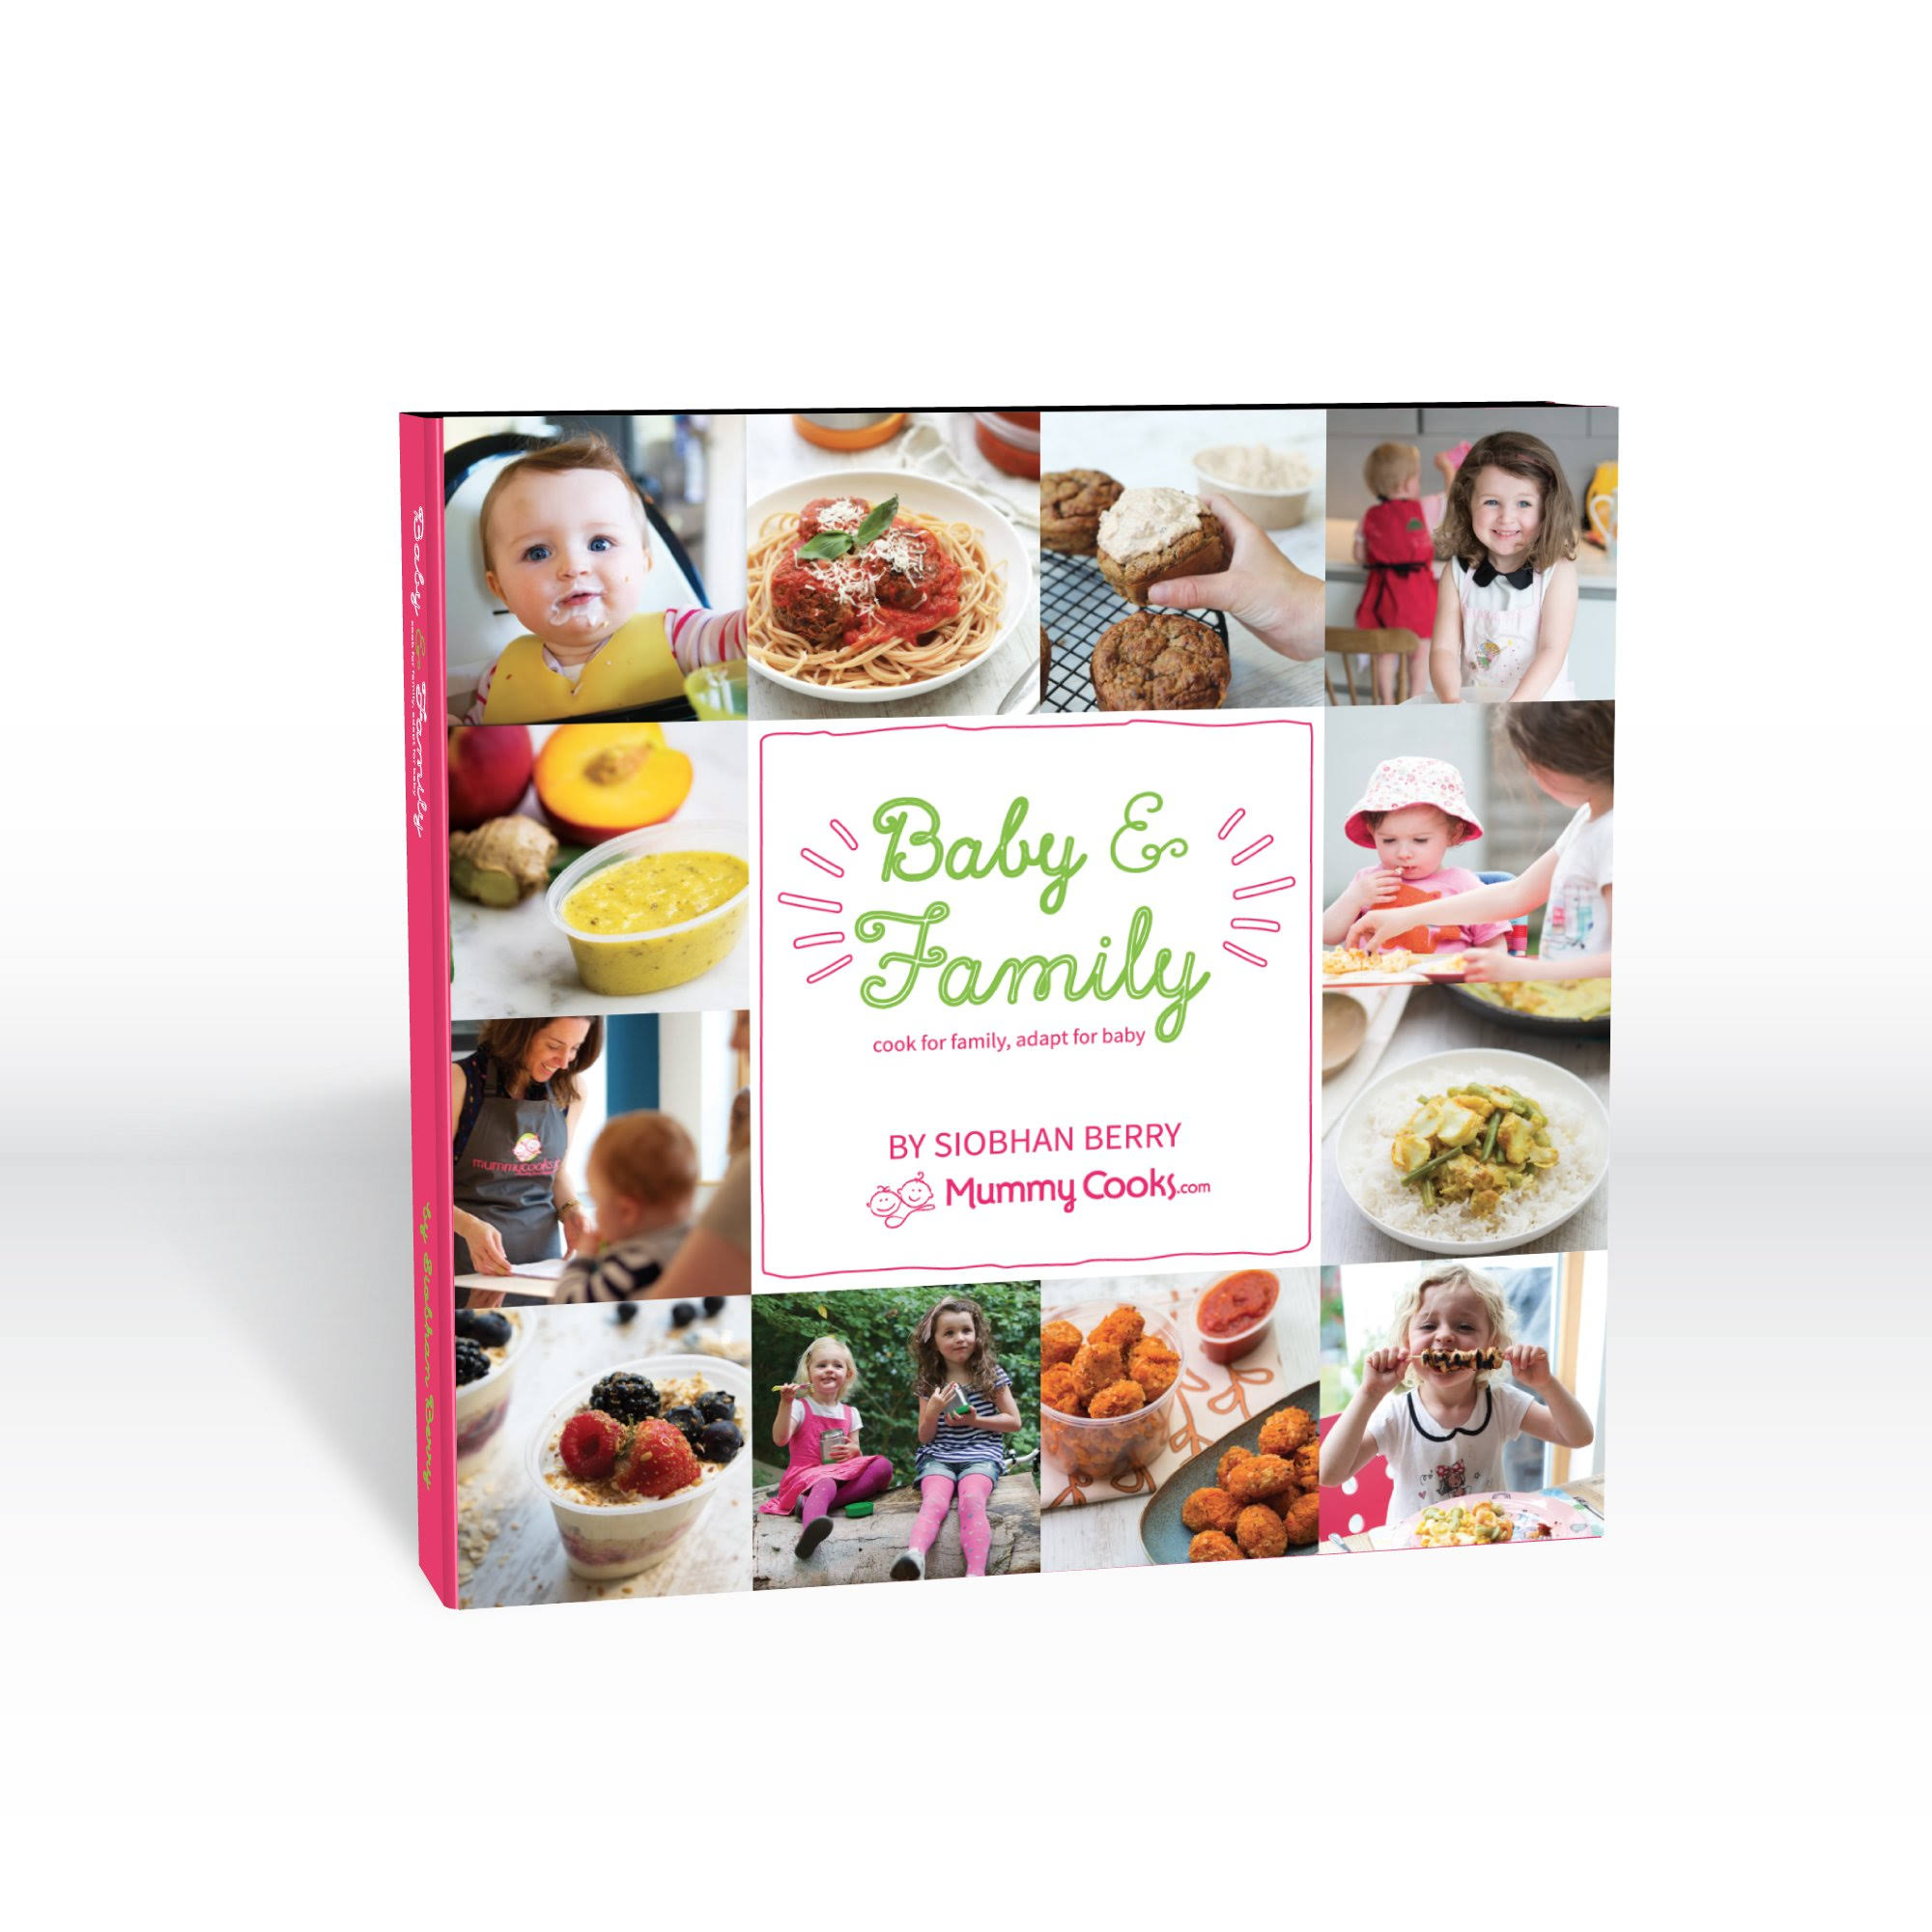 Mummy Cooks Baby and Family Recipe Book: Cook for Family, Adapt for Baby - Siobhan Berry